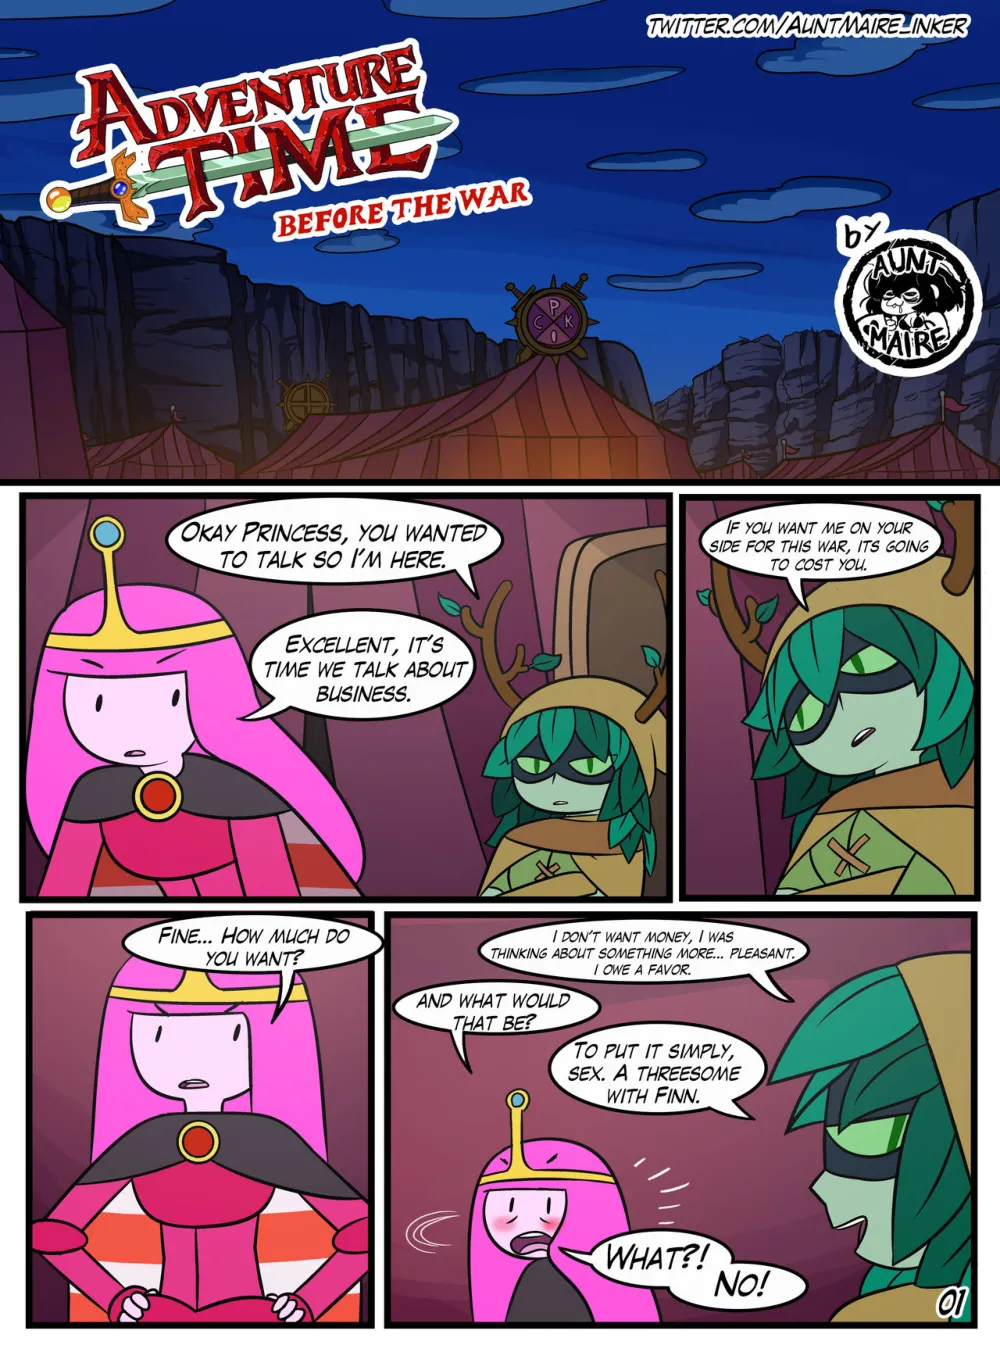 Adventure Time: Before the War - Page 1